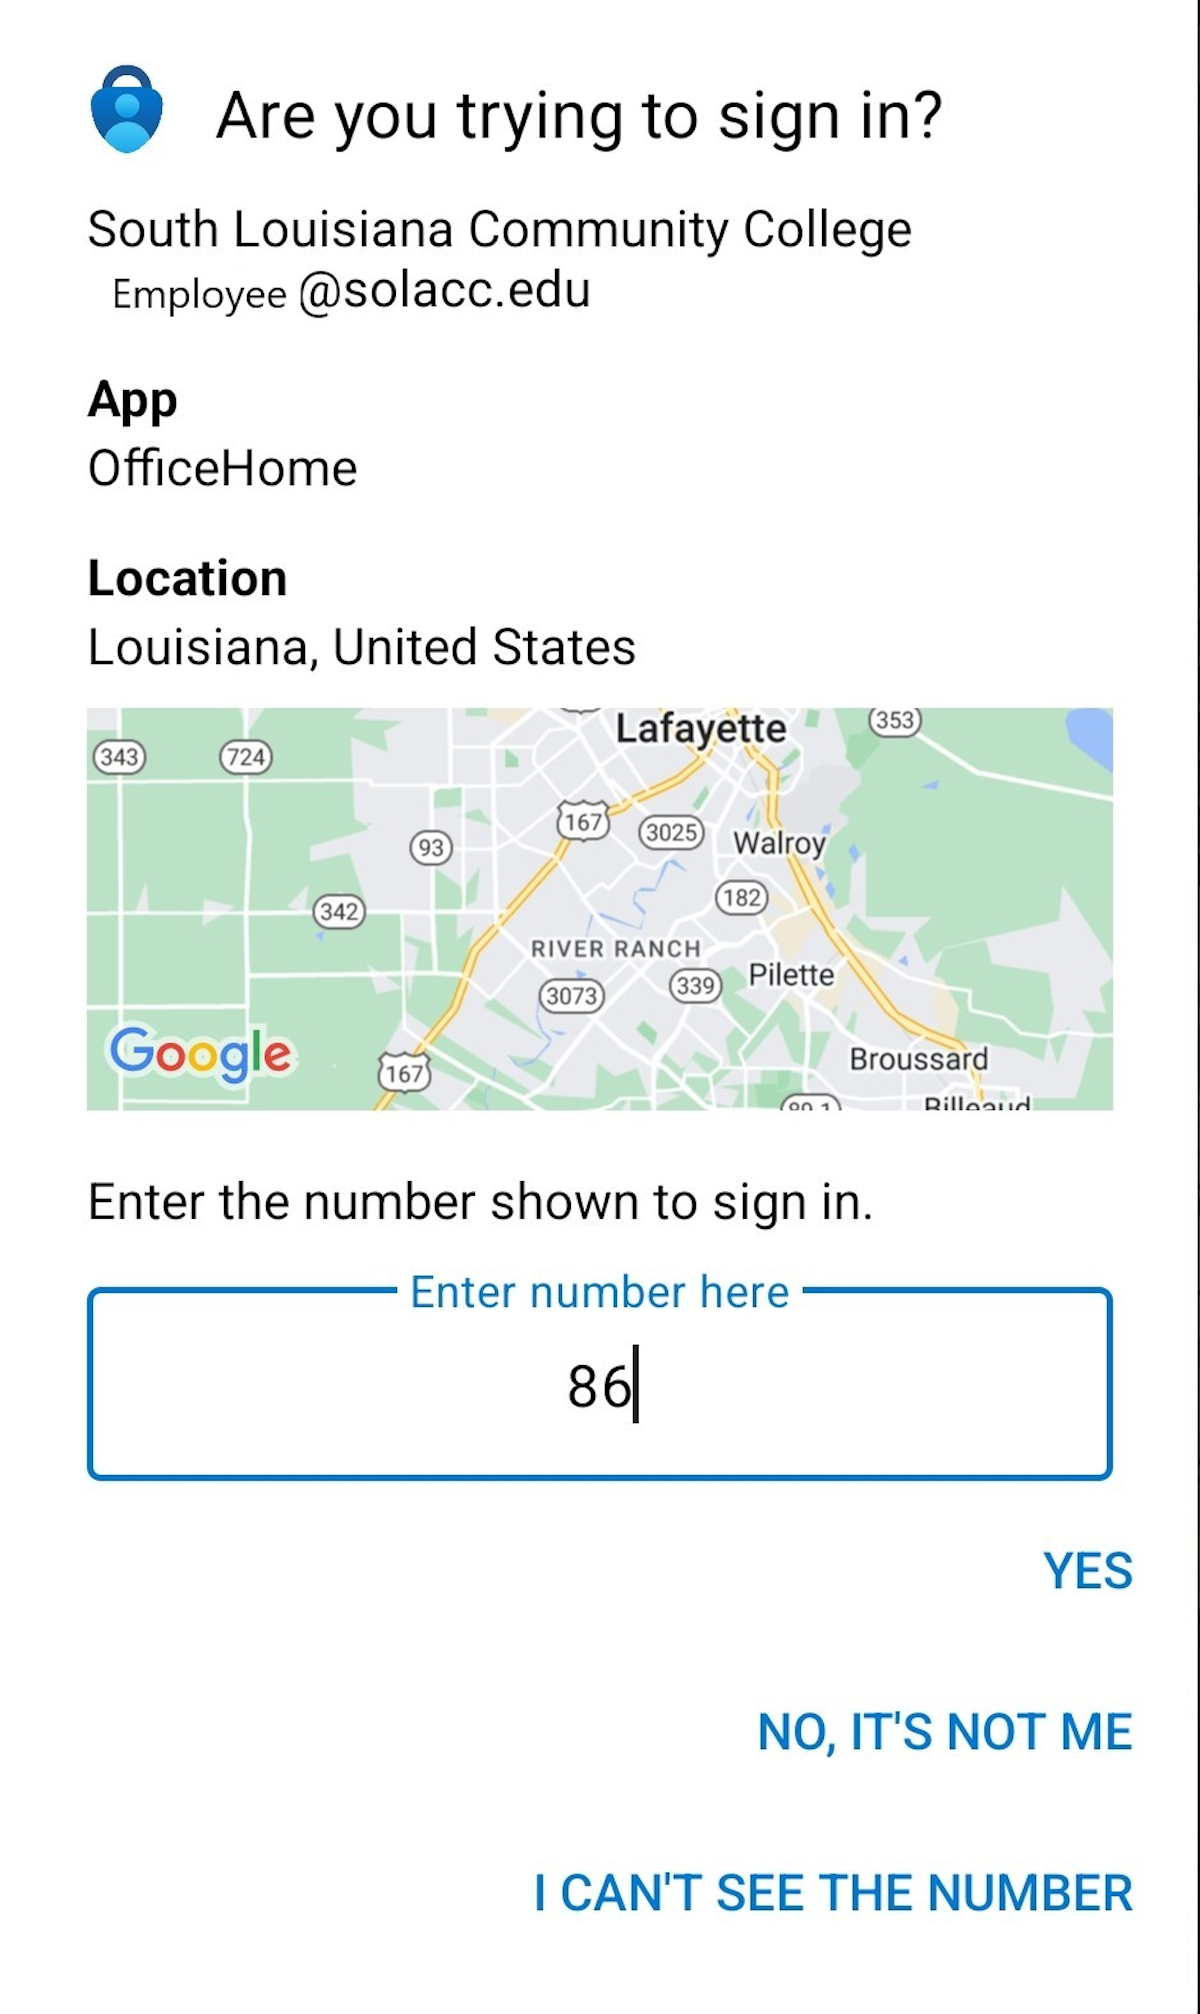 Go to the Microsoft authenticator app (shown below - previously used for "Approve" touch) and enter the number displayed.